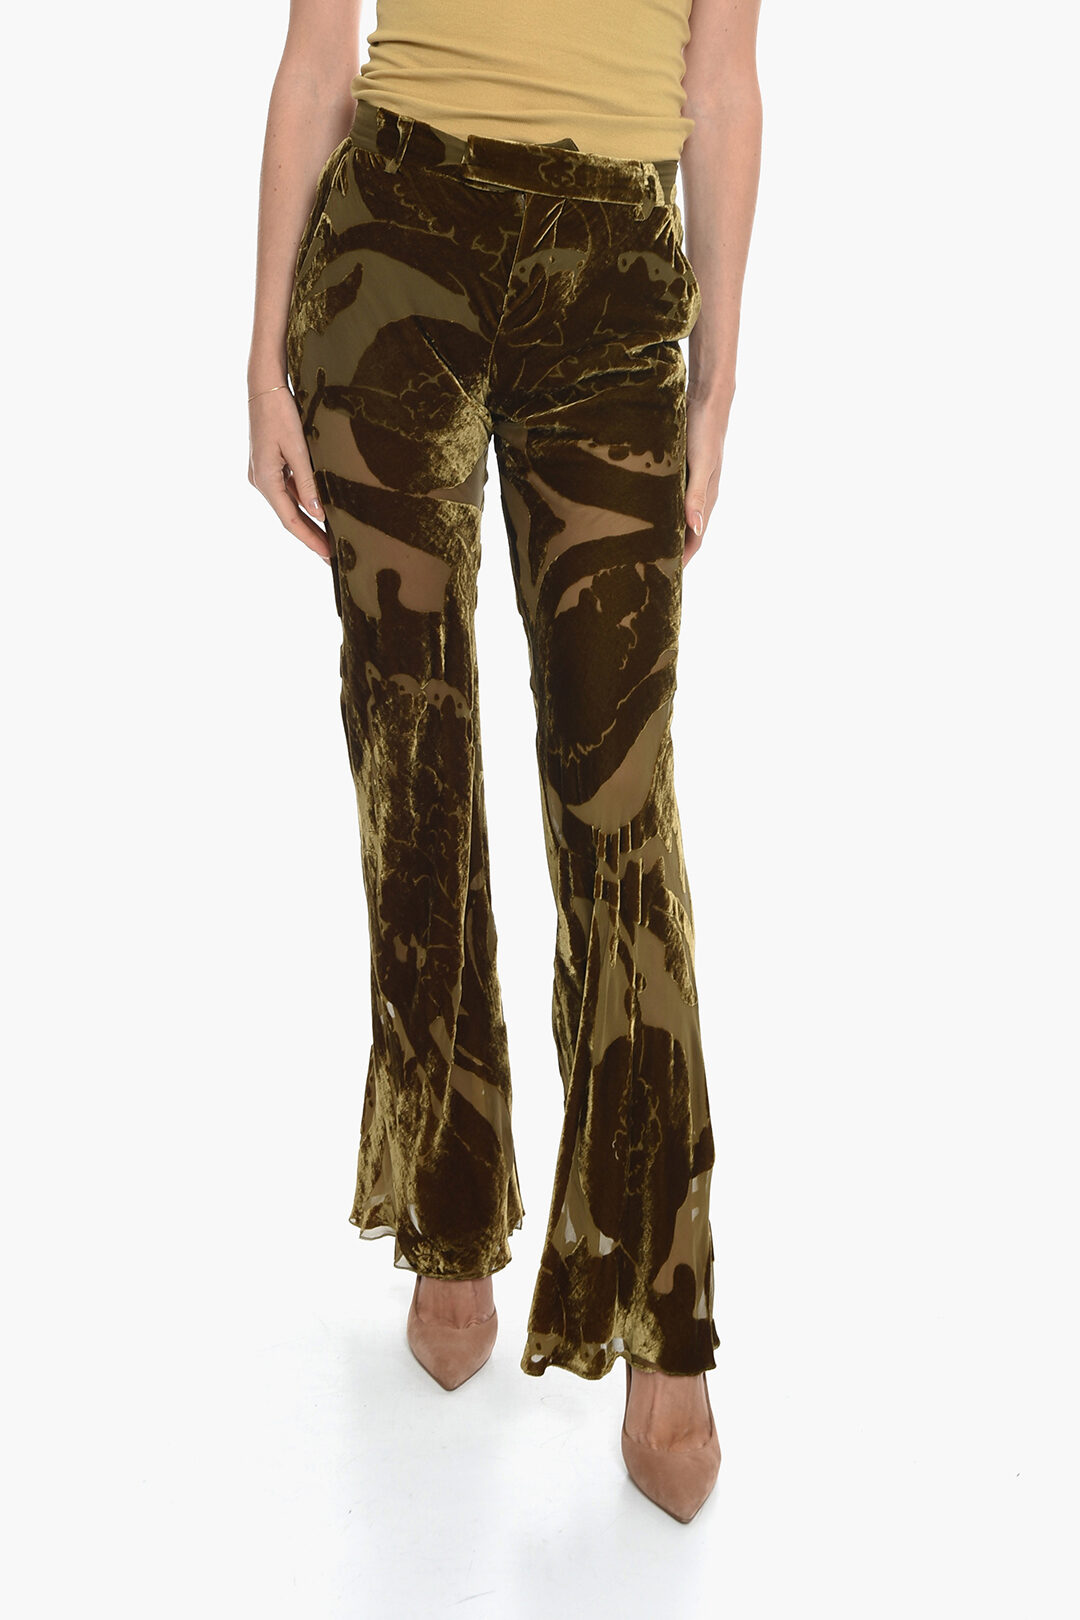 https://data.glamood.com/imgprodotto/velvet-see-through-pants-with-floral-motif_1410383_zoom.jpg